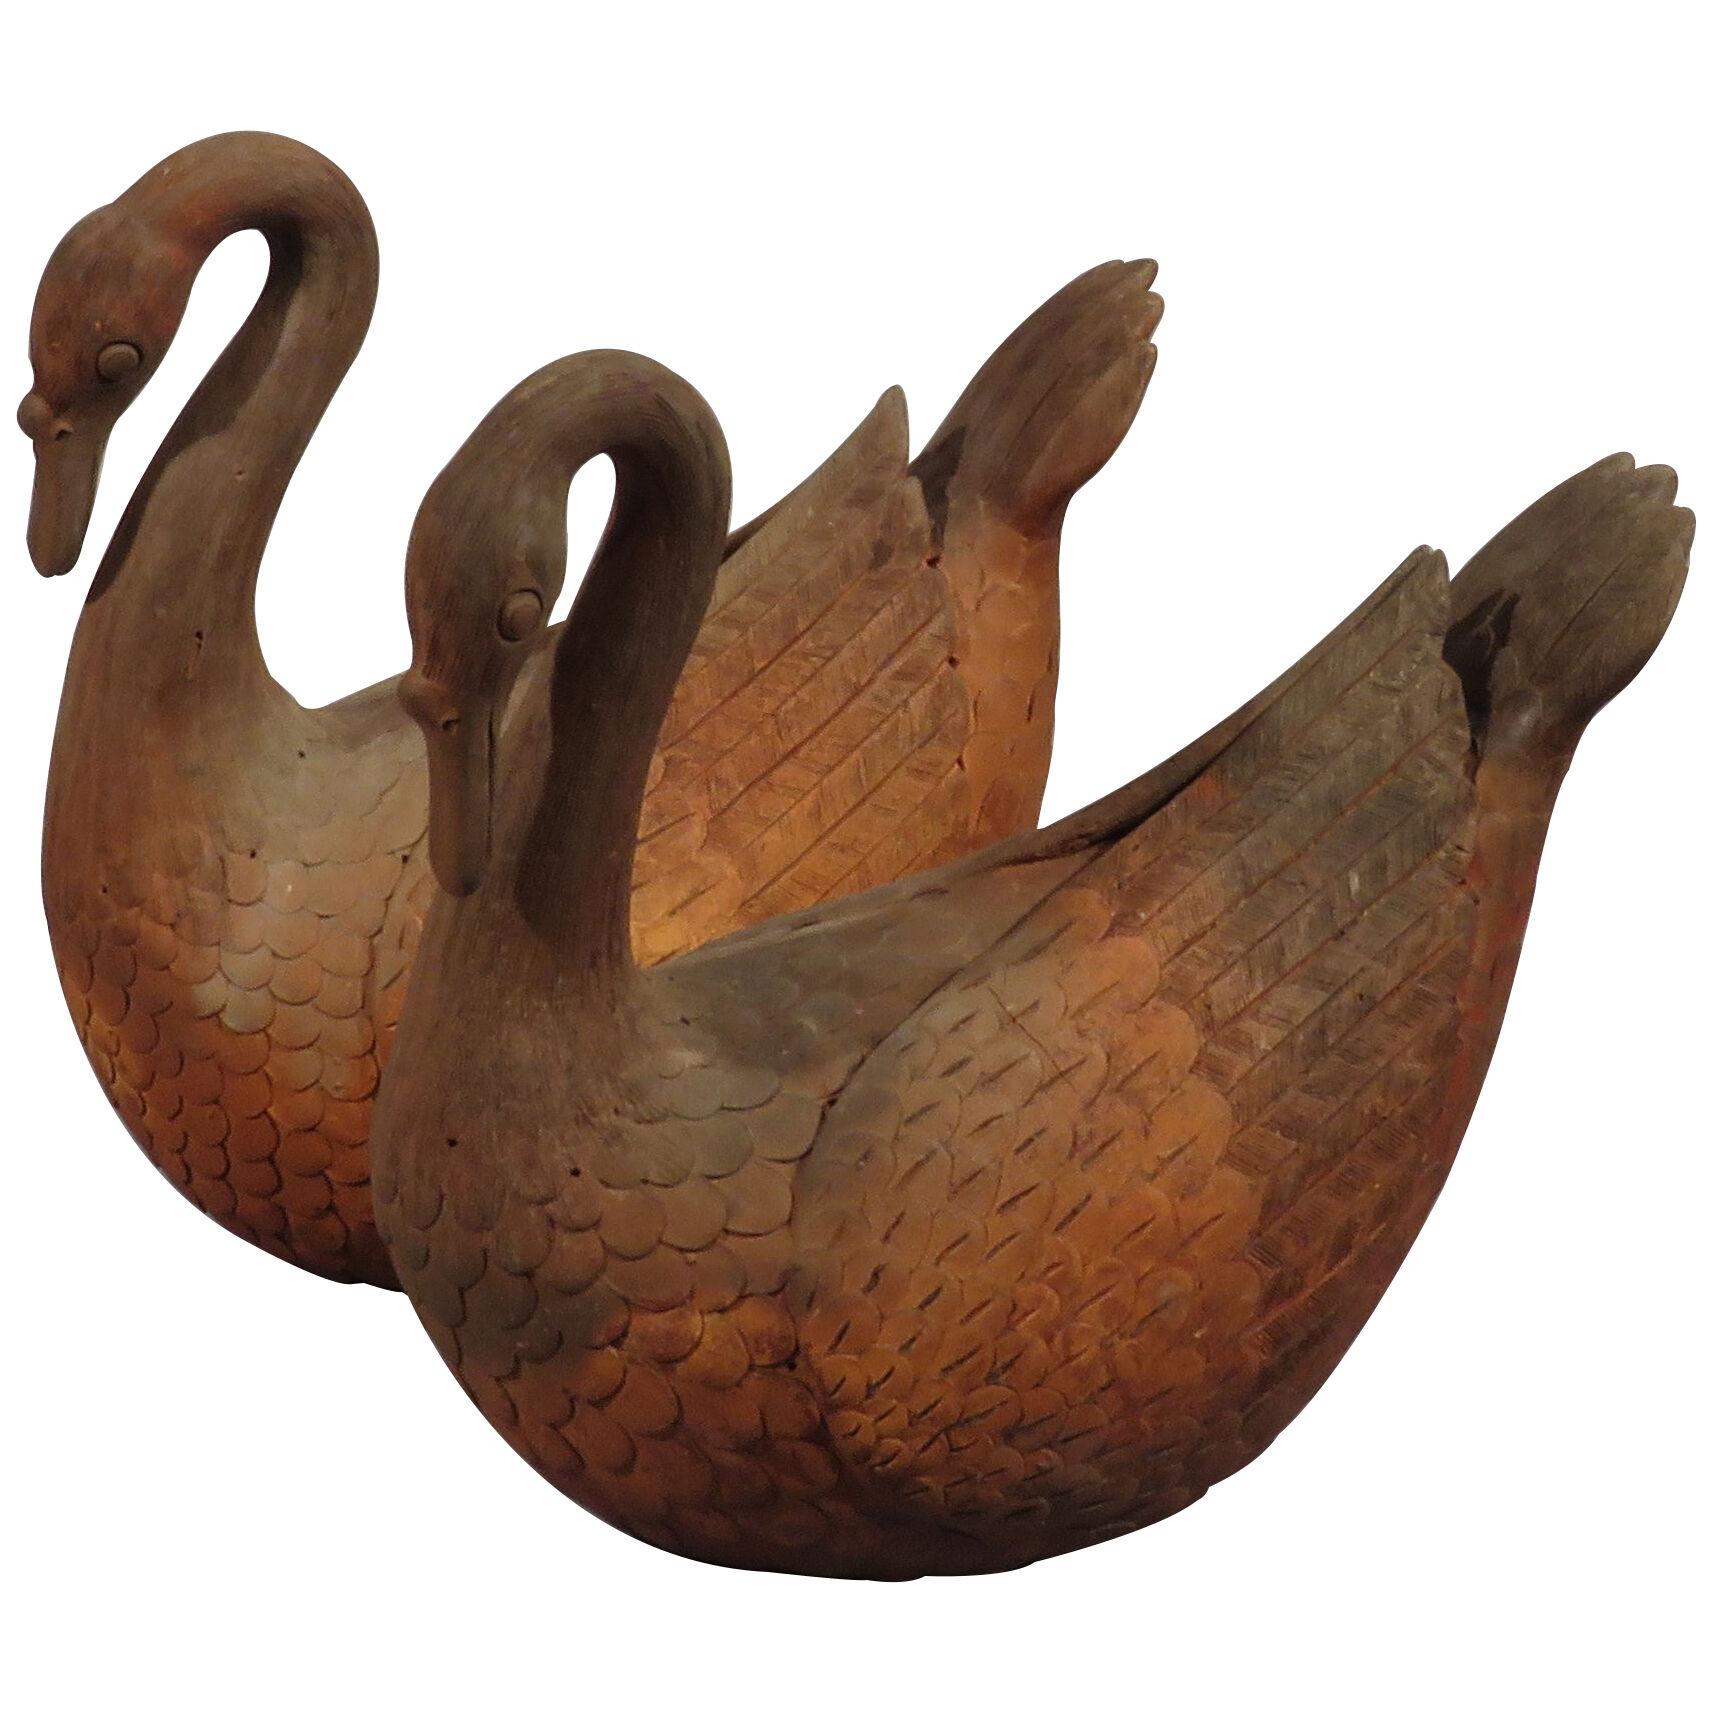  A Pair of Late 19th Century Terracotta Swans